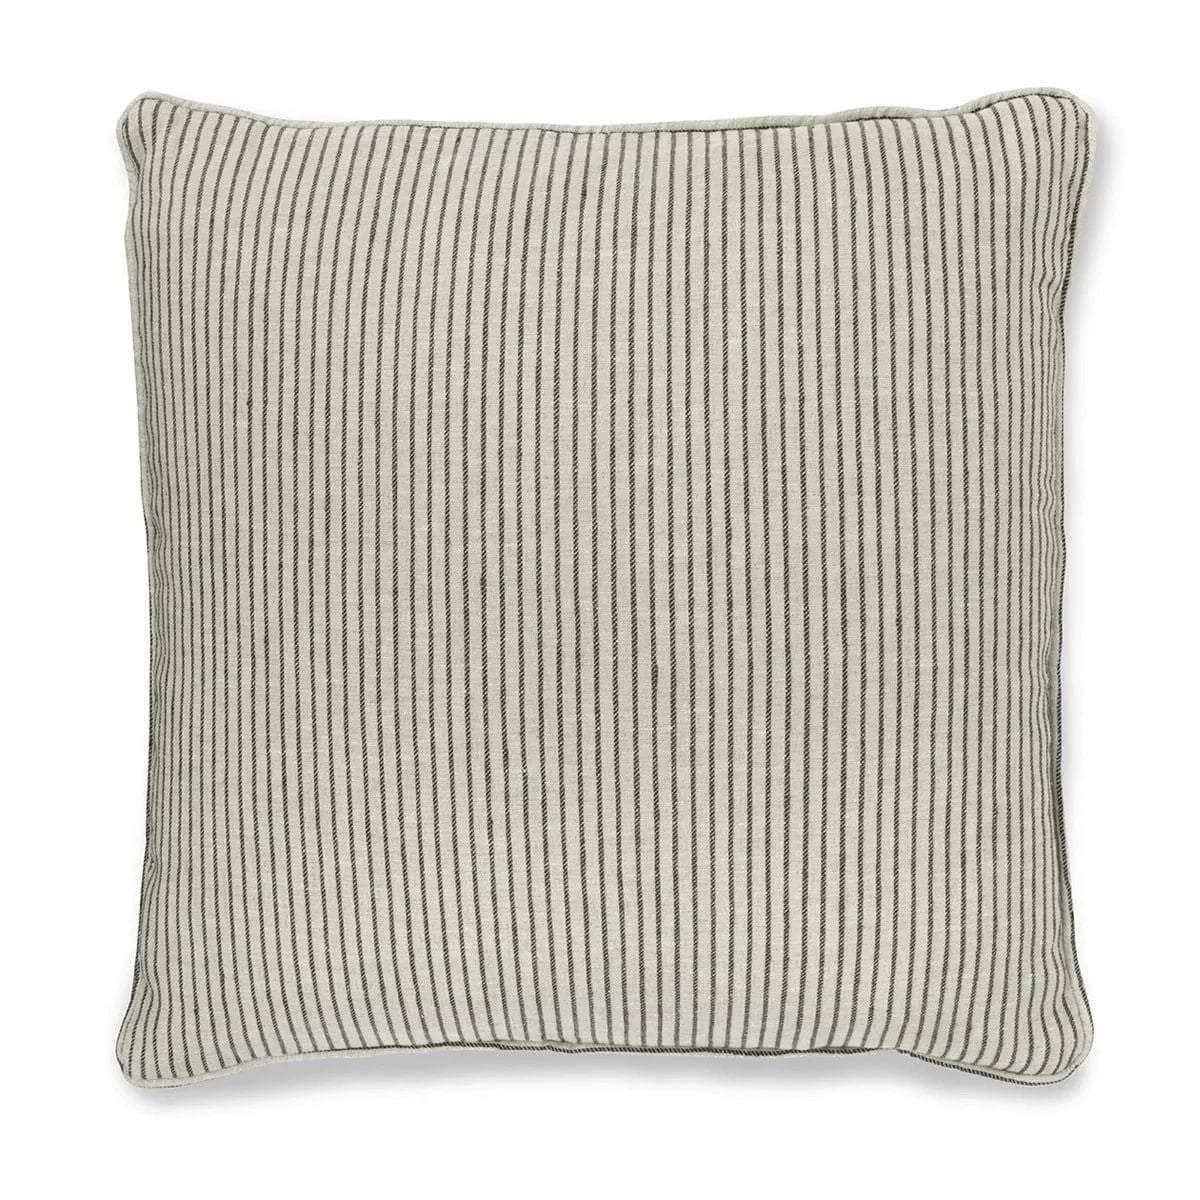 Textured Stripe Cushion in Charcoal/ Natural with Self Trim